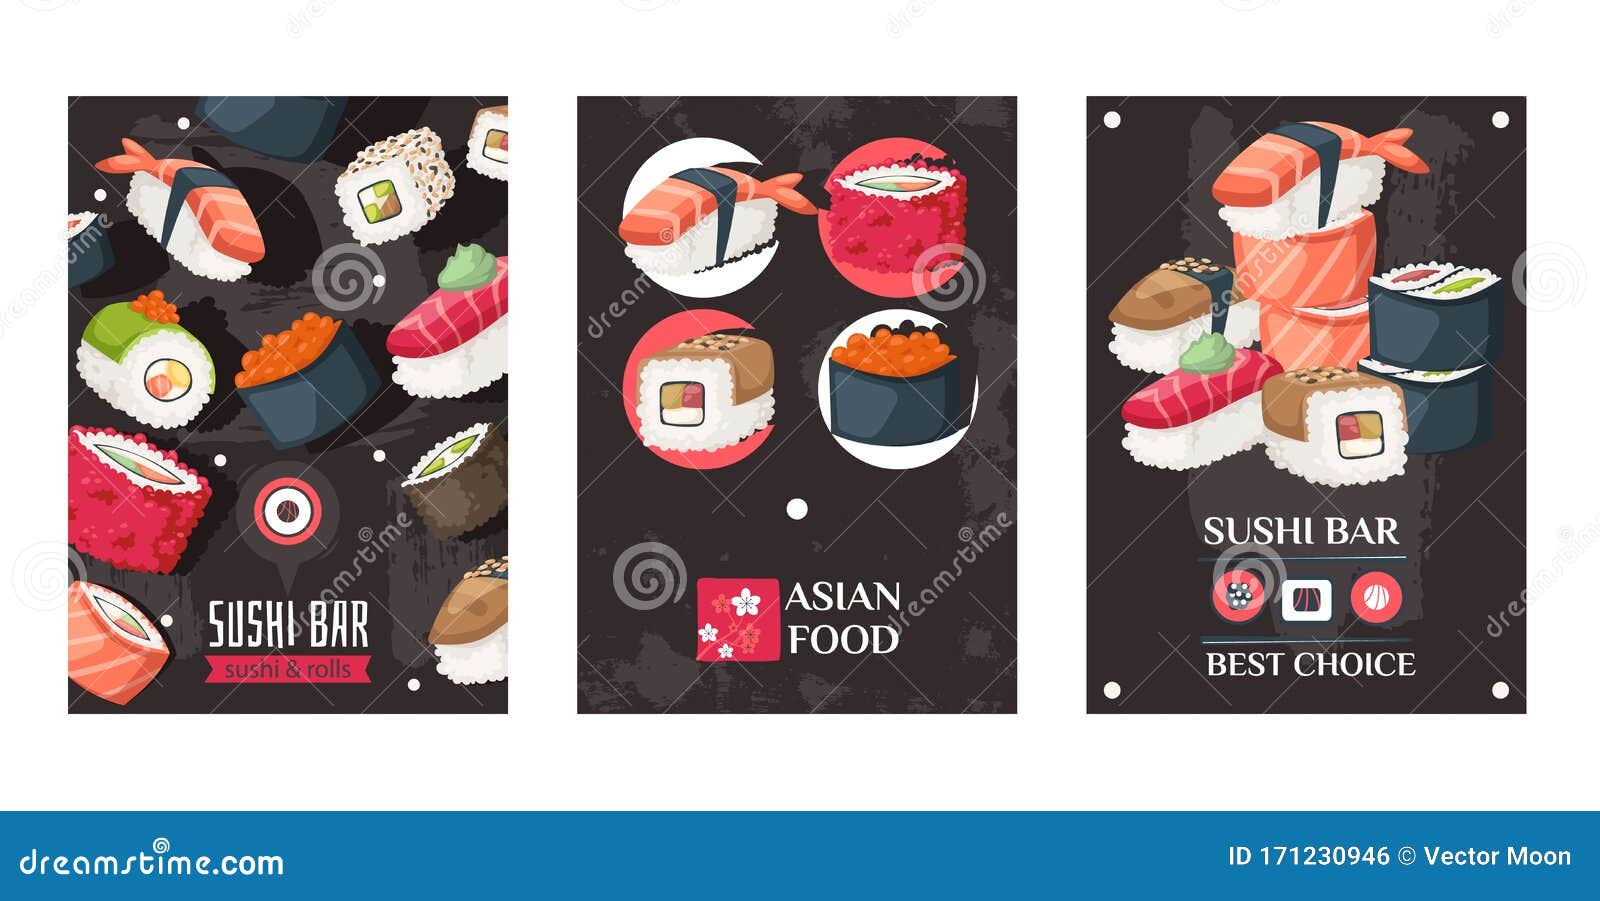 sushi bar advertisement banners vector illustration asian food delivery japanese seafood restaurant rolls menu cover 171230946